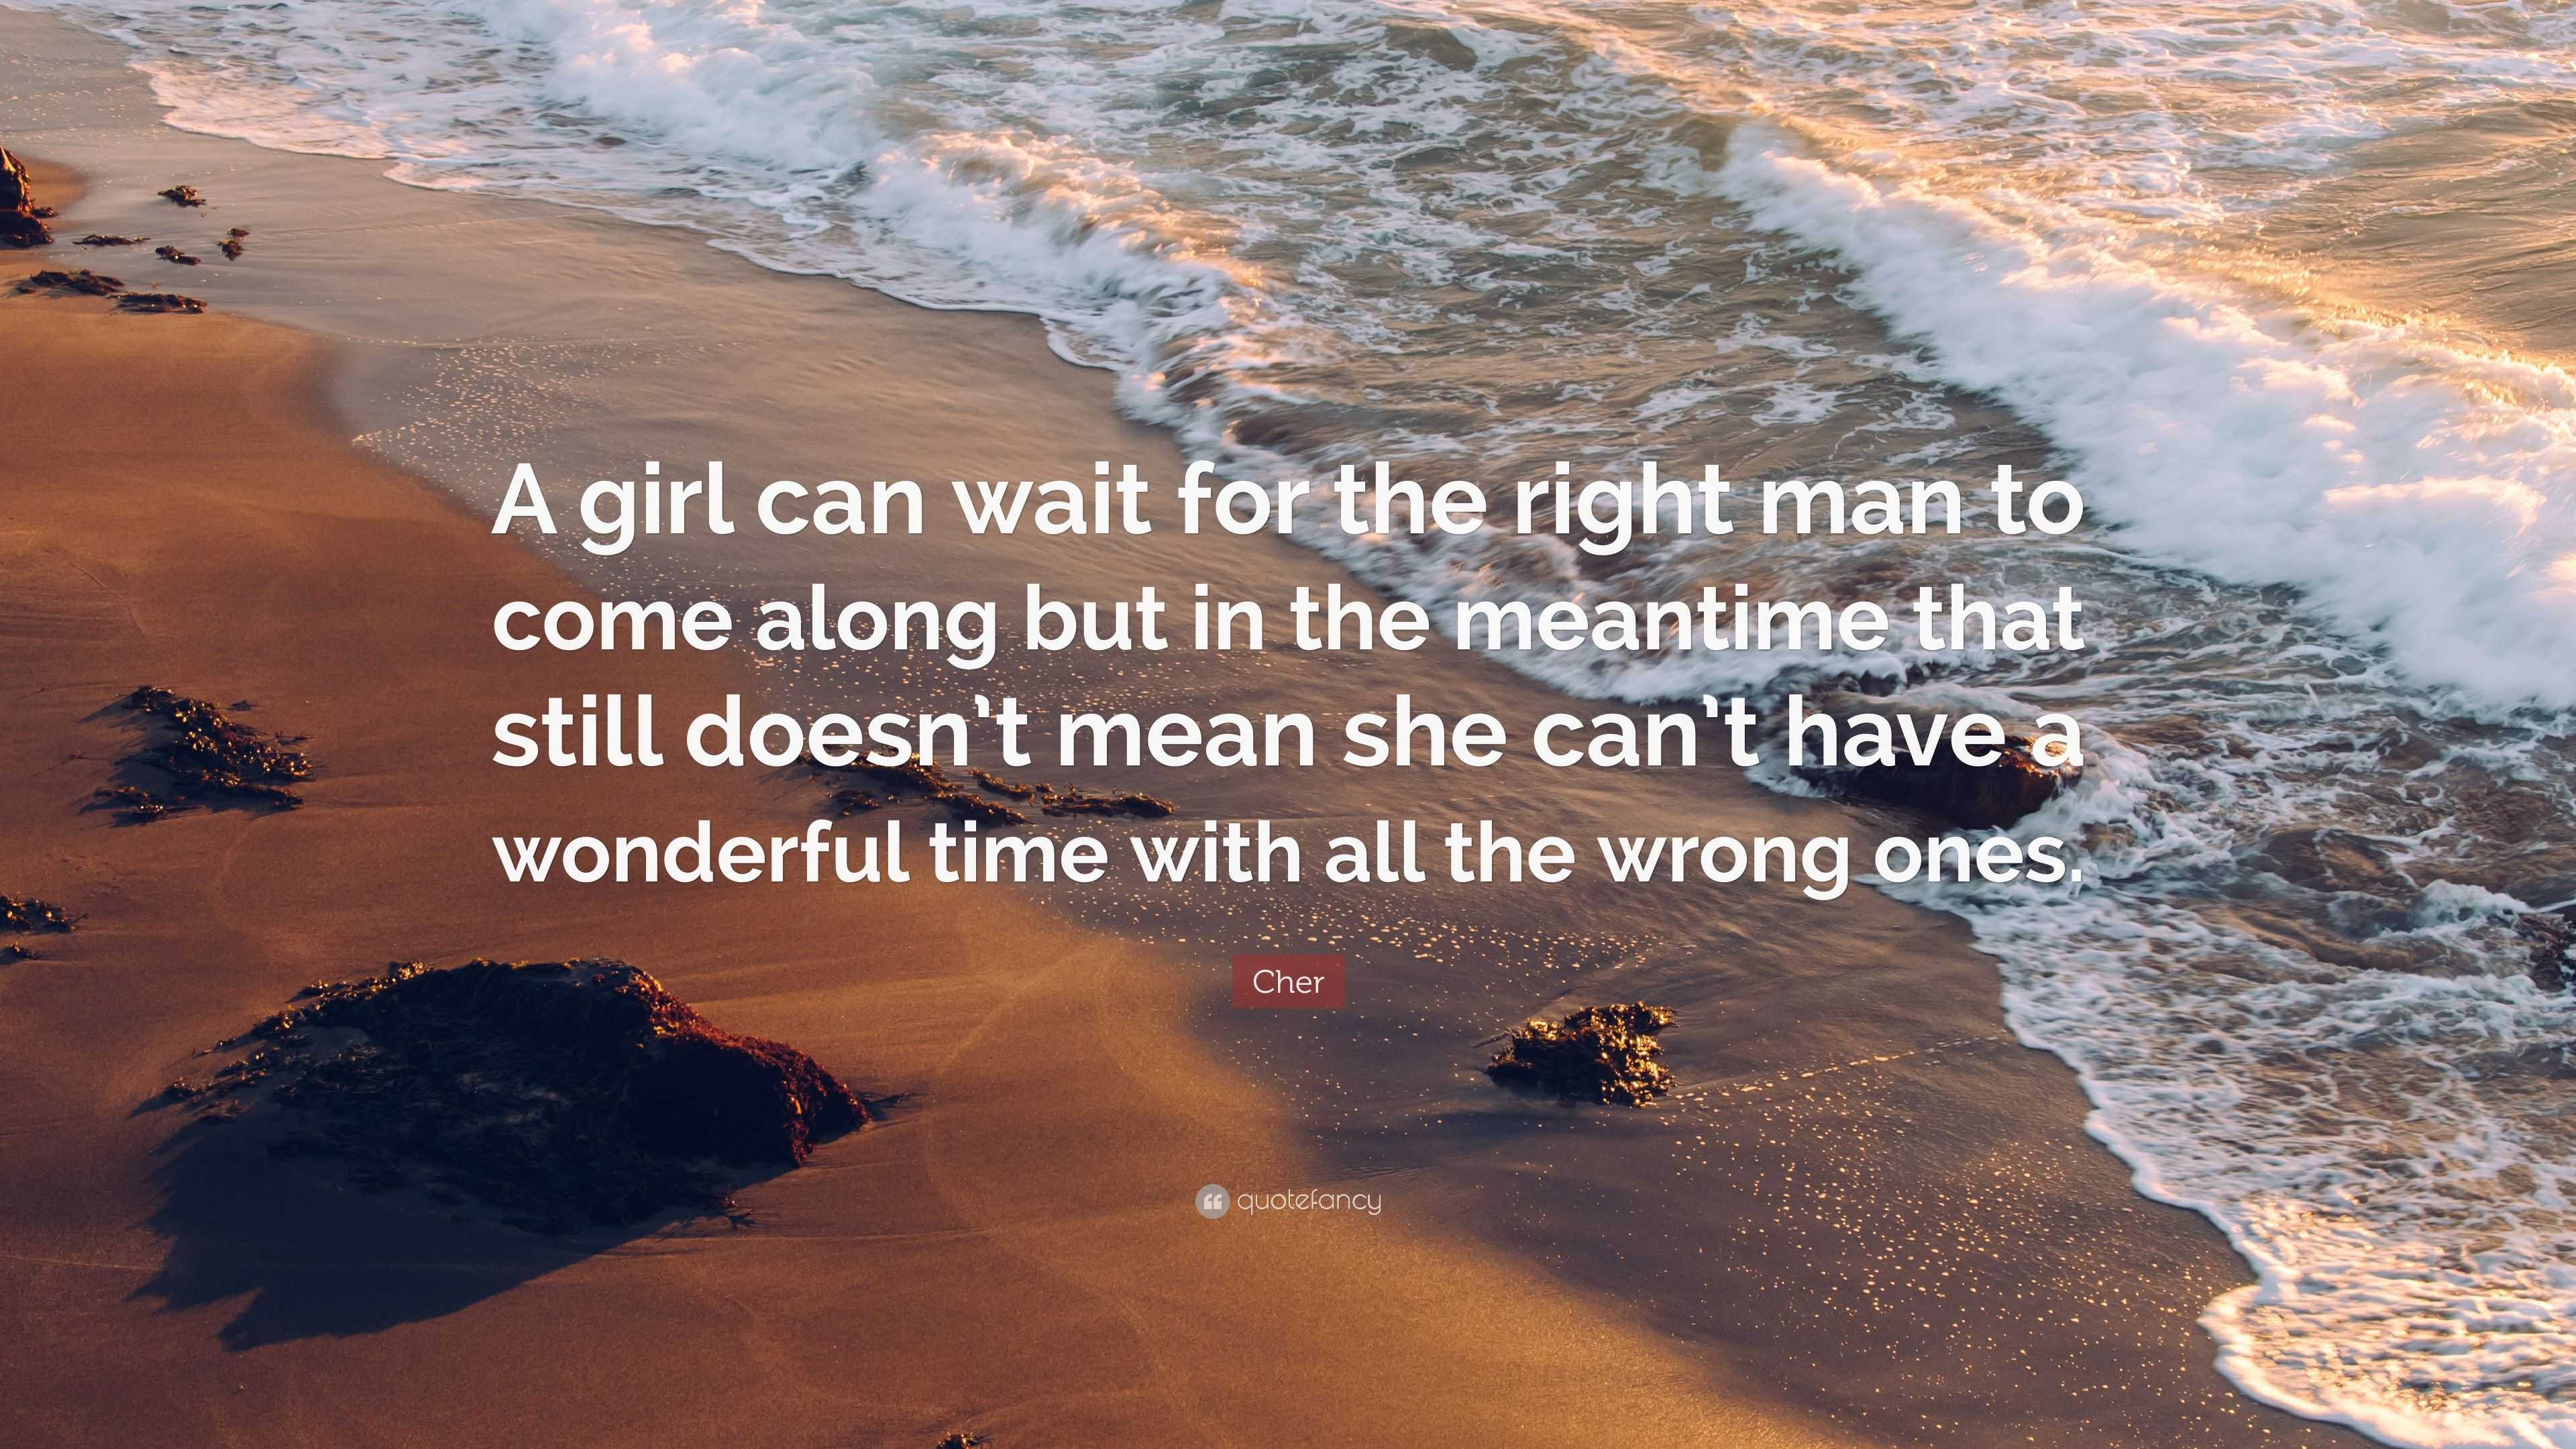 Waiting for the right man